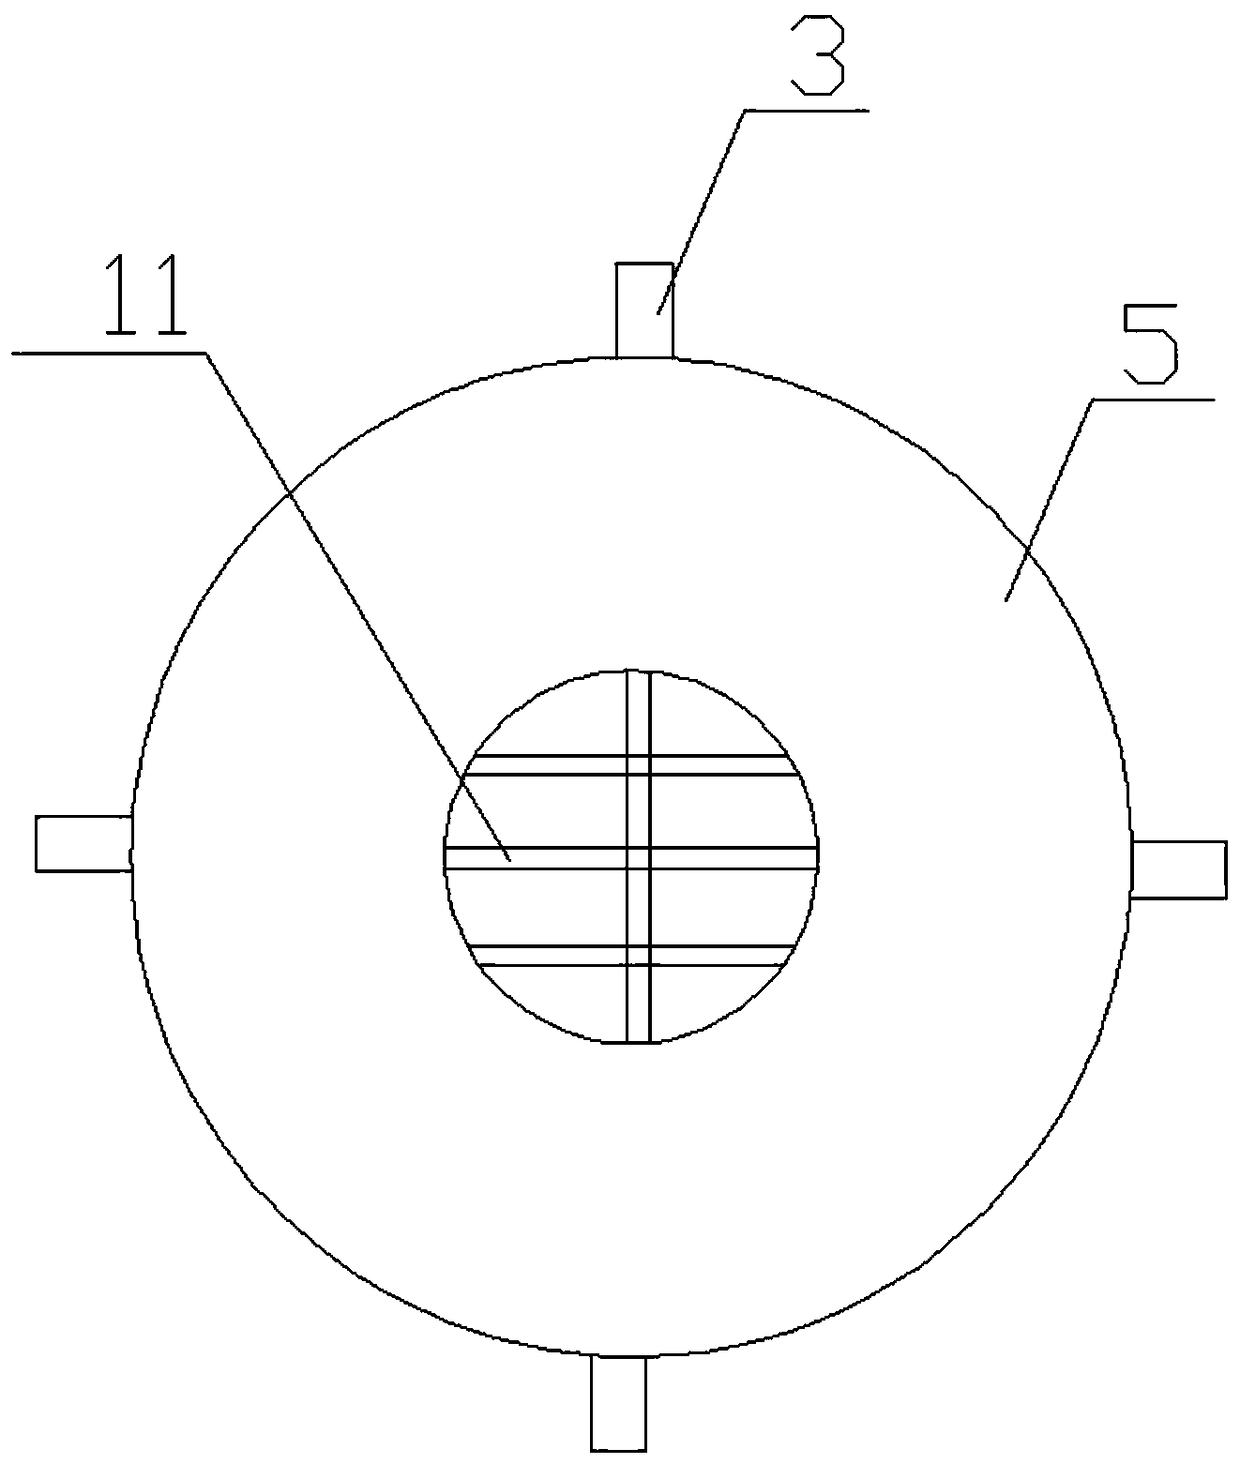 Transition beam for sling suitable for hoisting large objects